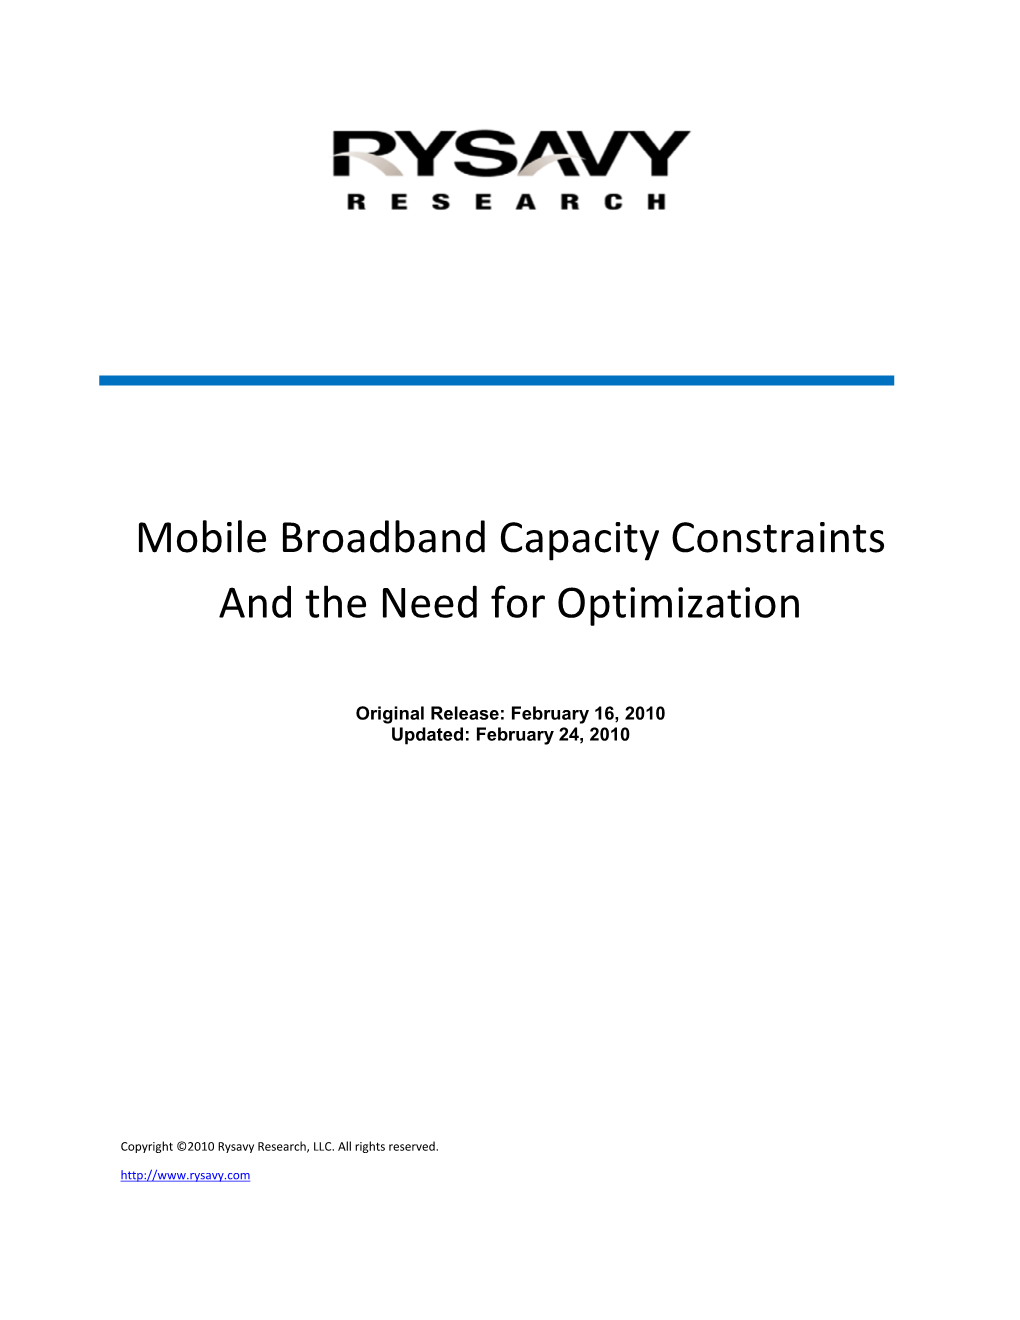 Mobile Broadband Capacity Constraints and the Need for Optimization